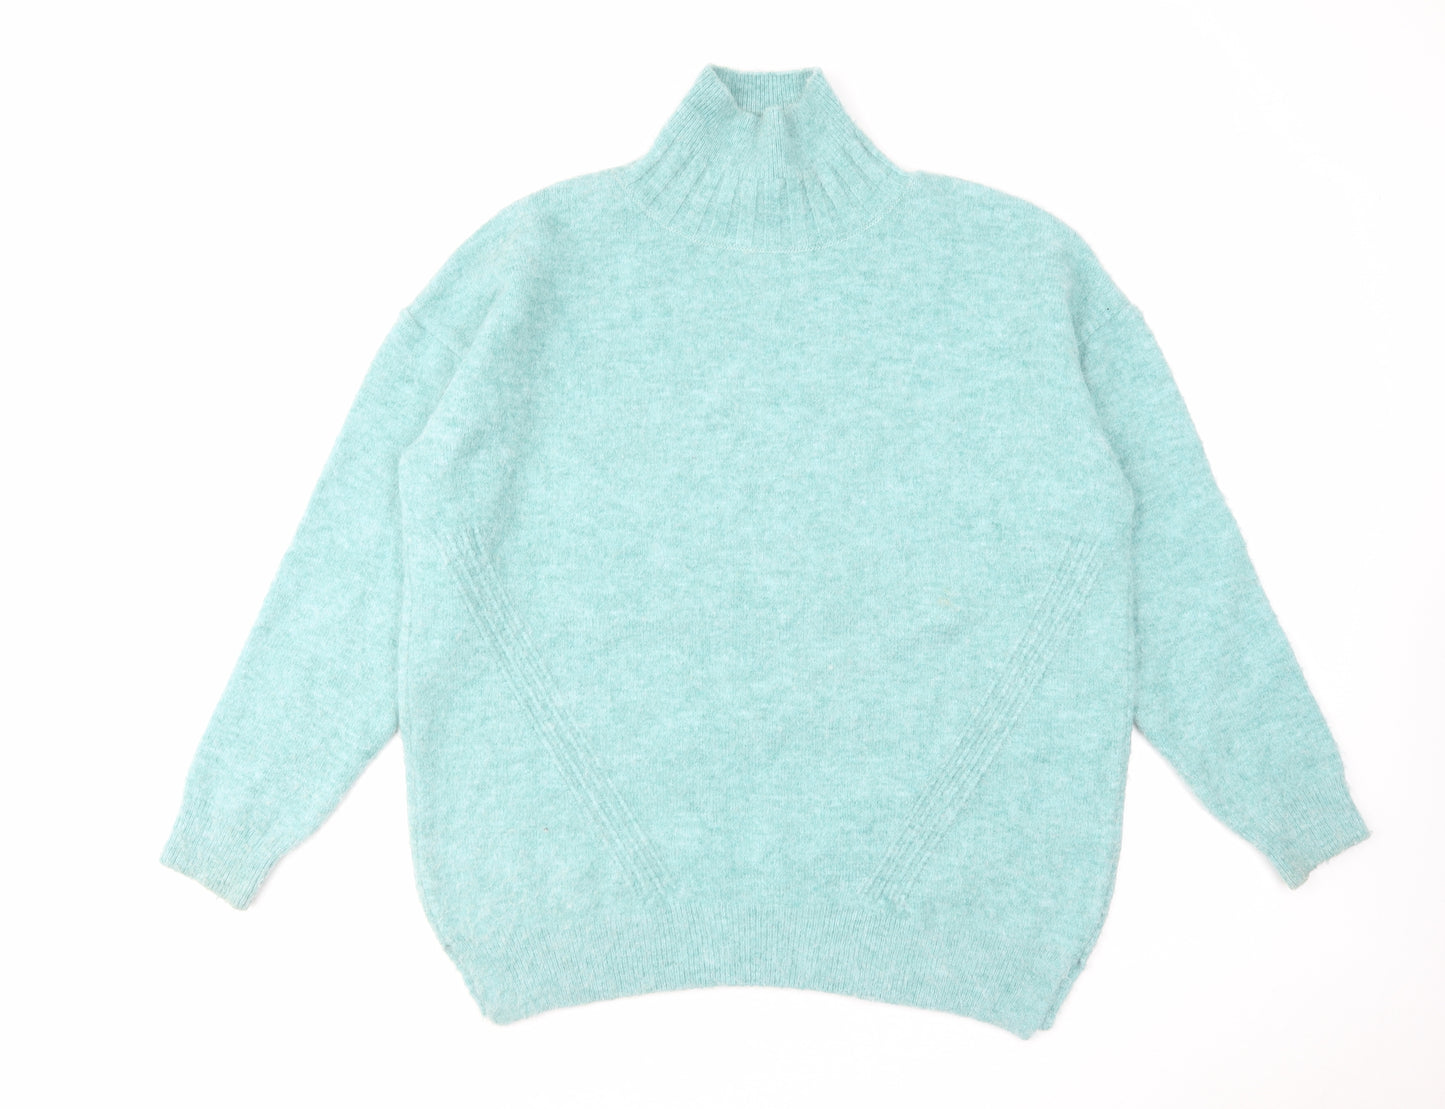 Topshop Womens Blue High Neck Acrylic Pullover Jumper Size S